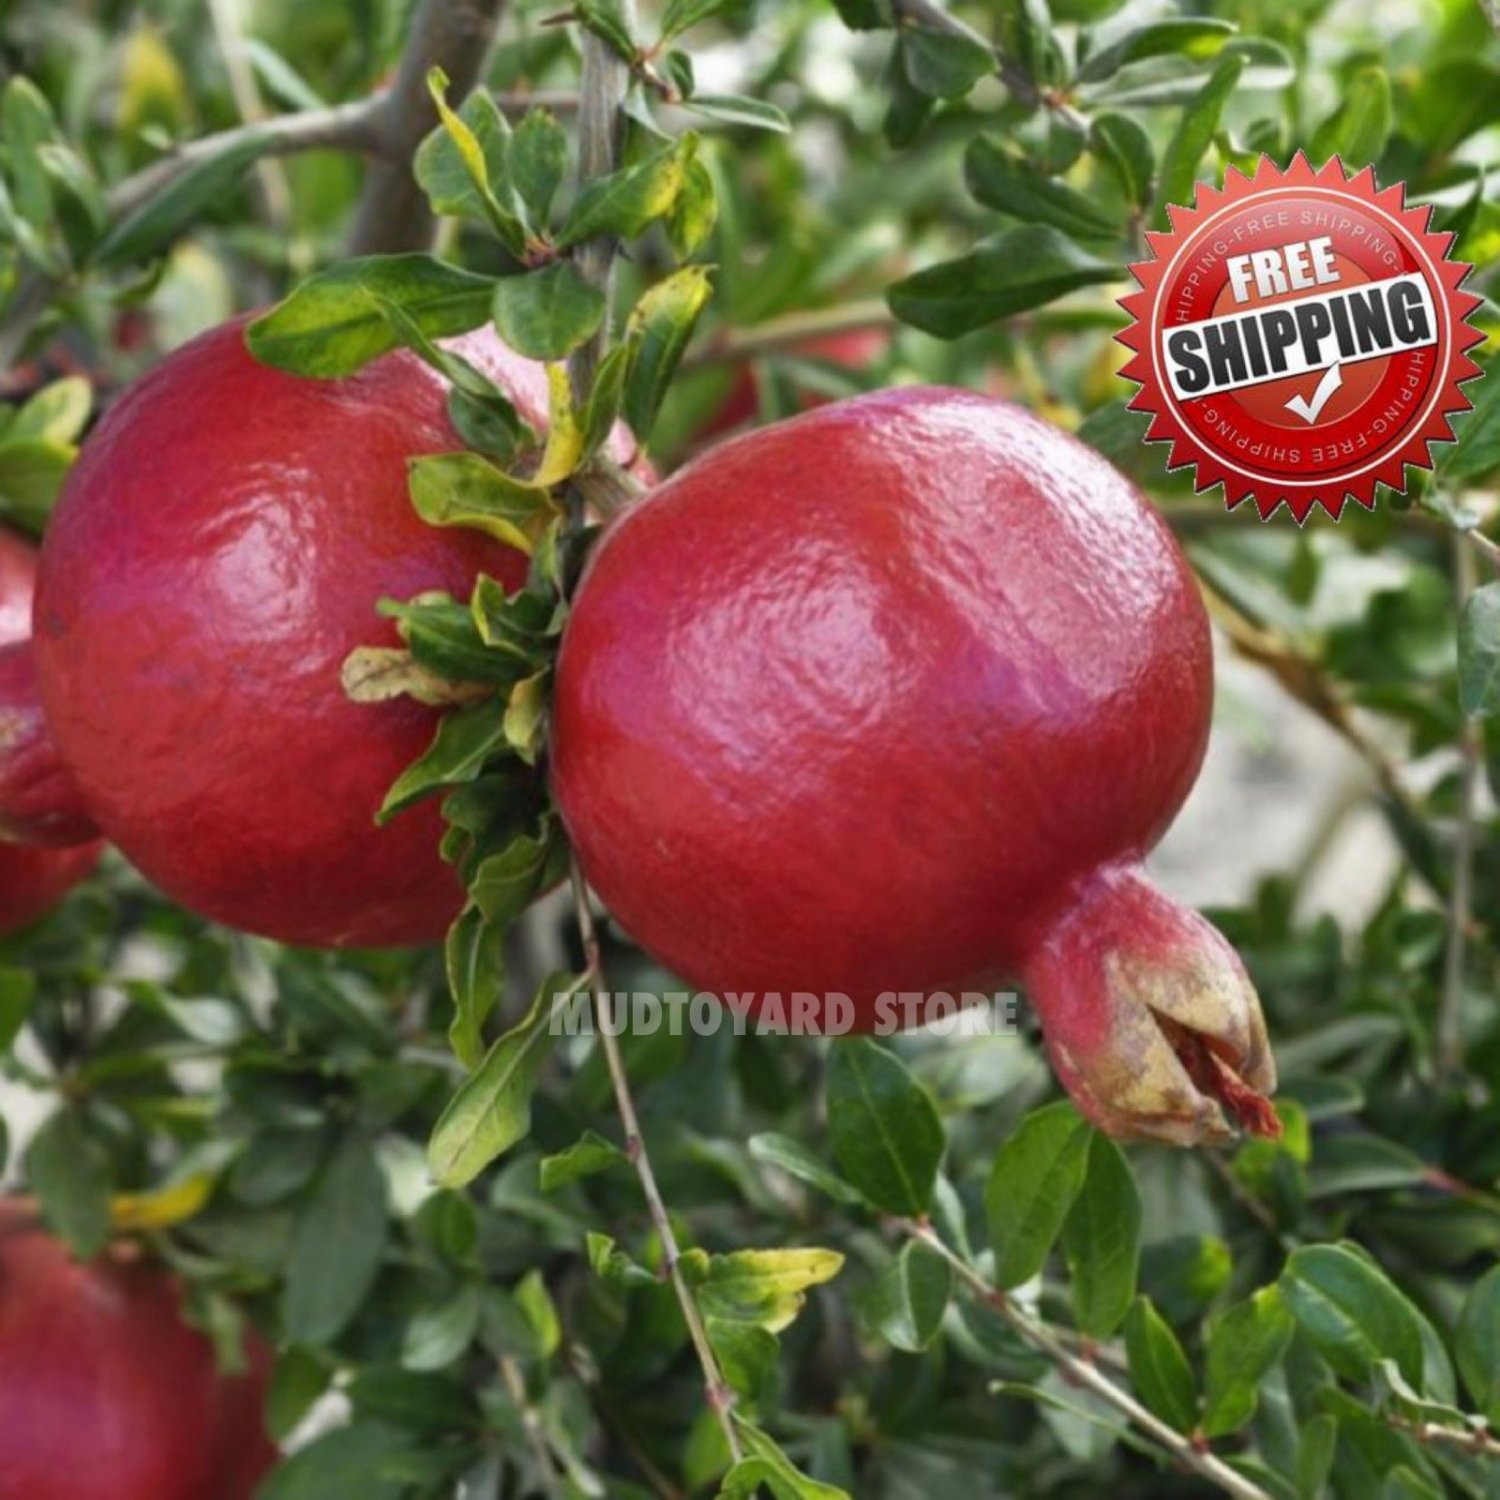 20pcs Tunisia Sweet pomegranate tree seeds Punica granatum seed edible fruitOther Products from mudtoyard (View All)